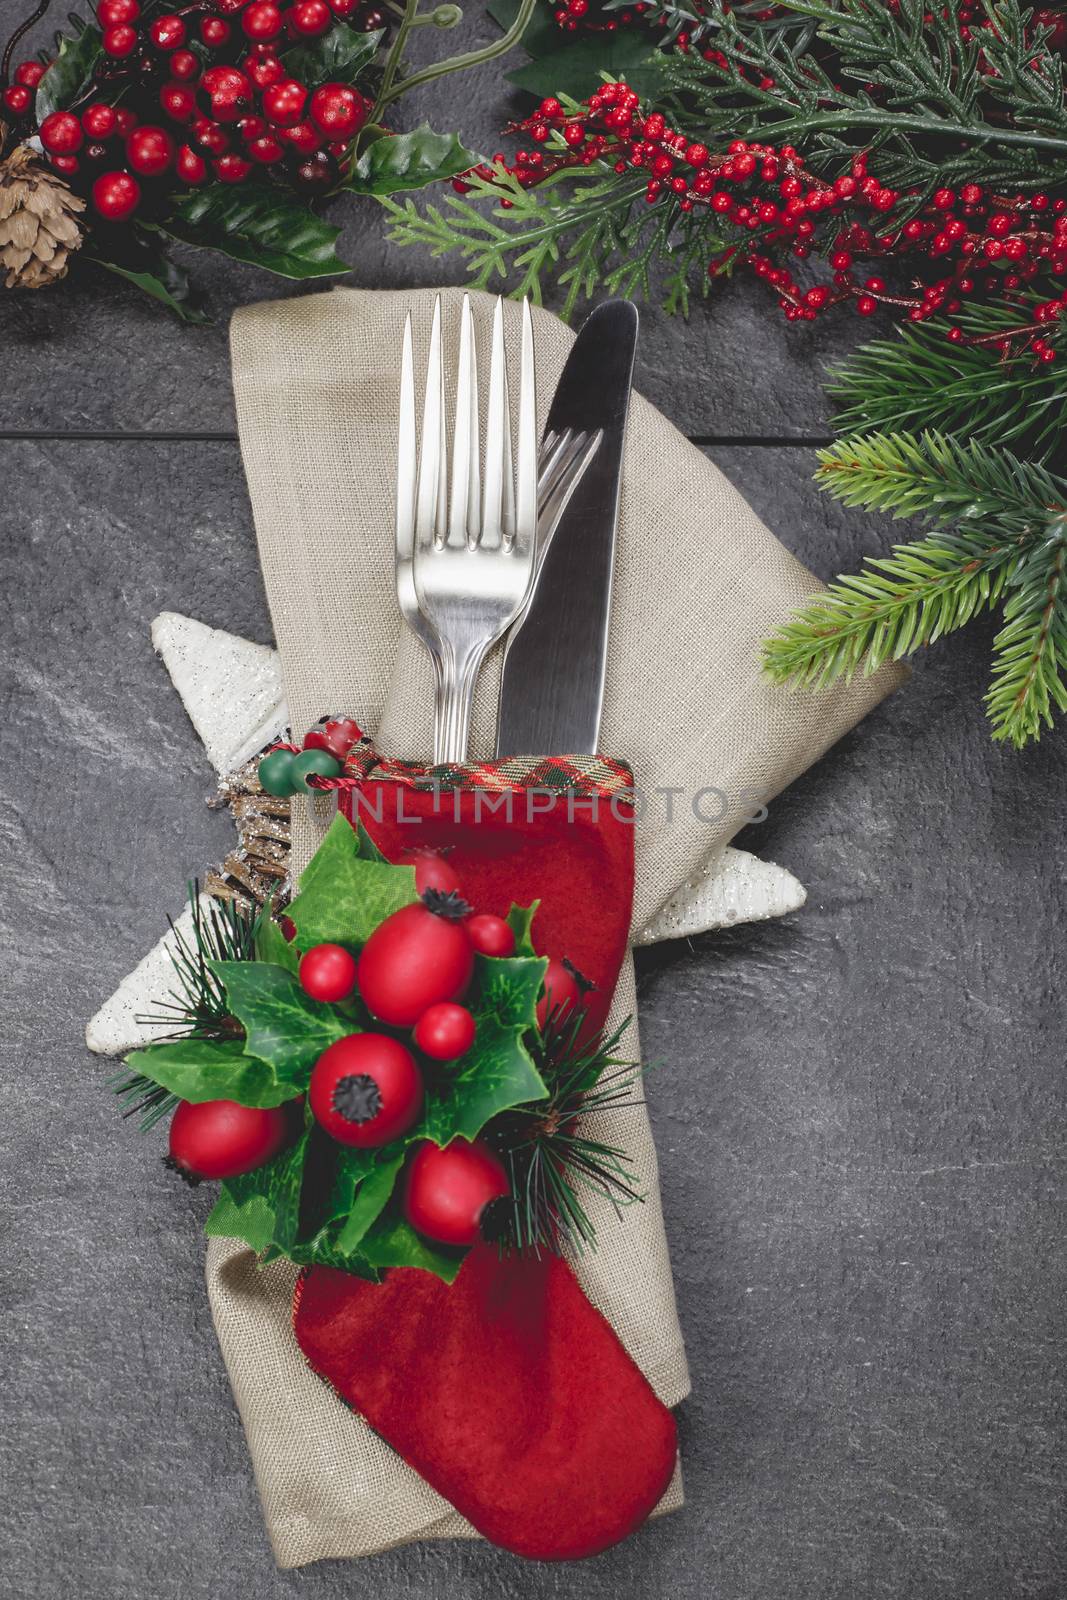 Holiday place setting by Slast20